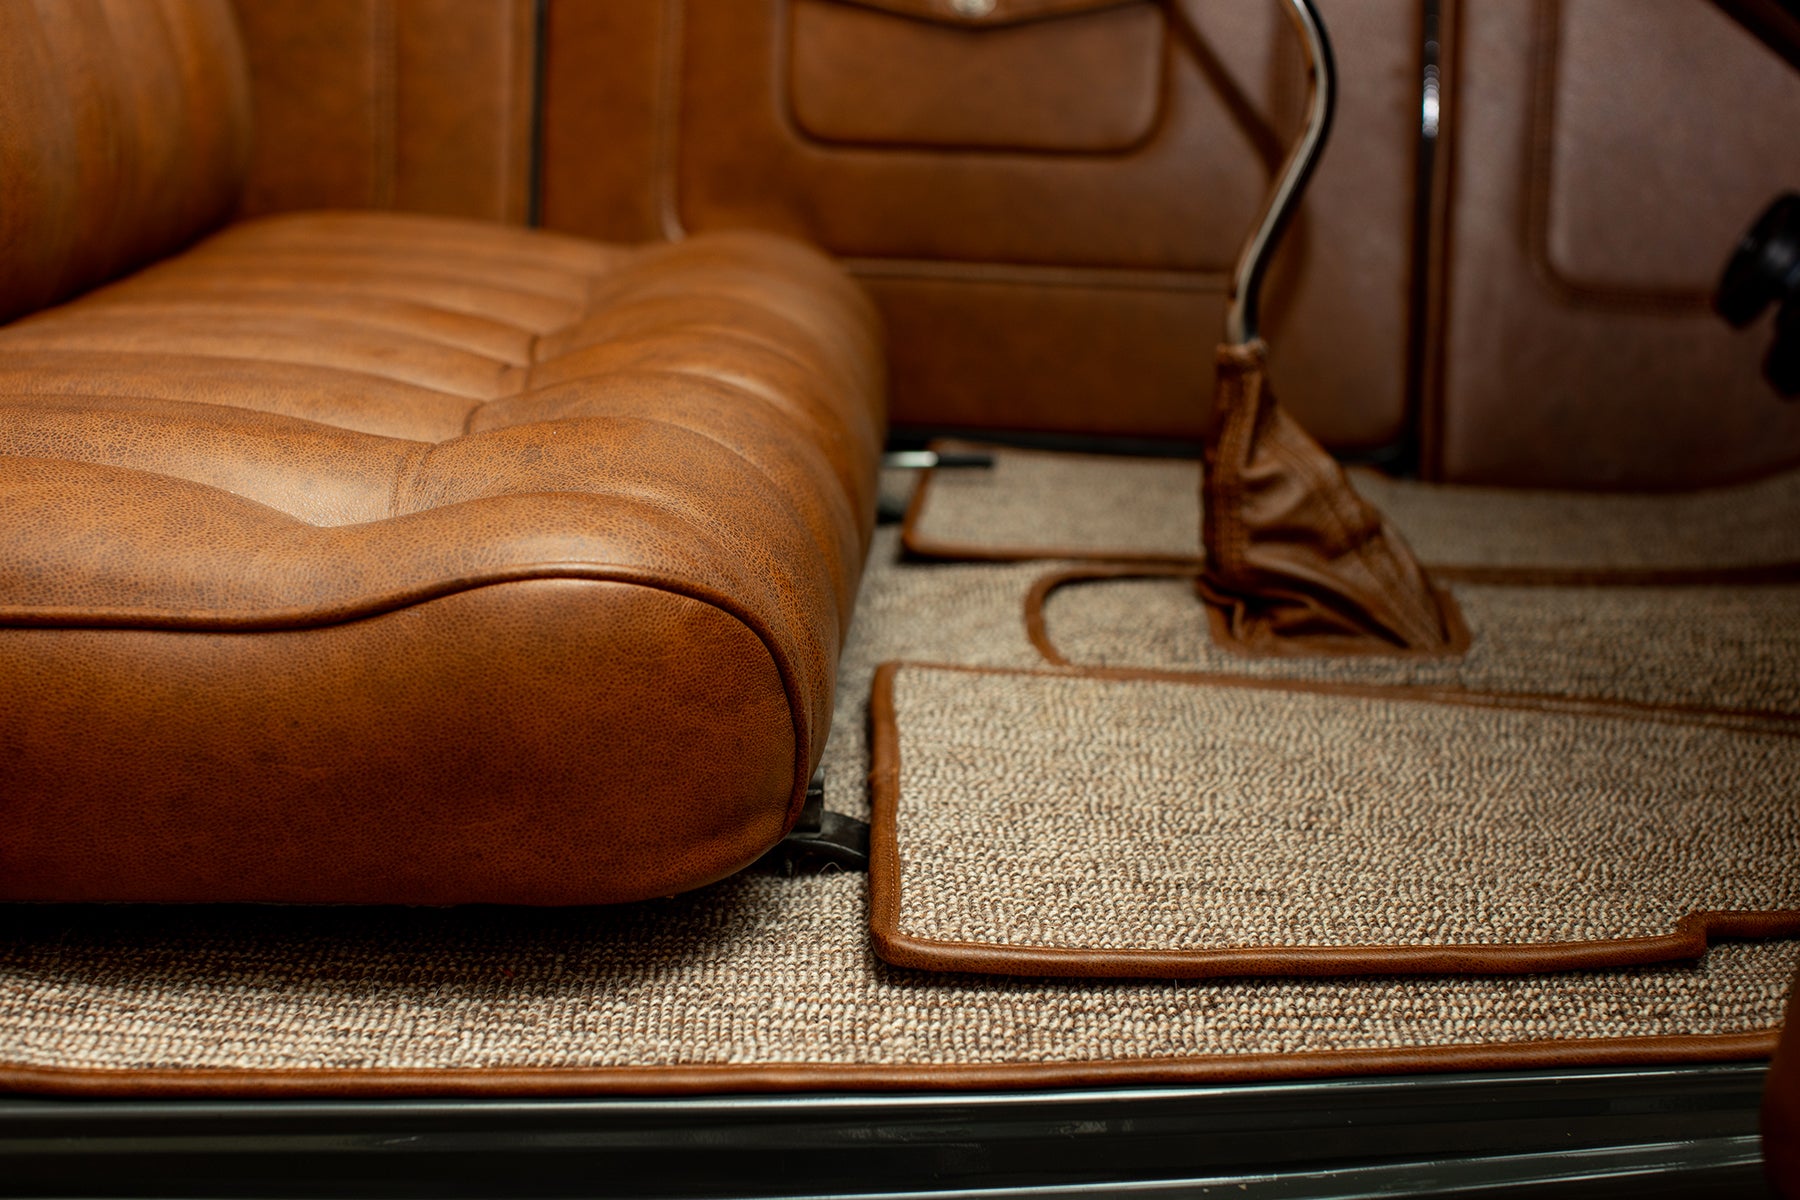 1932 Ford Roadster with Relicate Vintage Saddle Distressed Leather honey brown square weave carpet